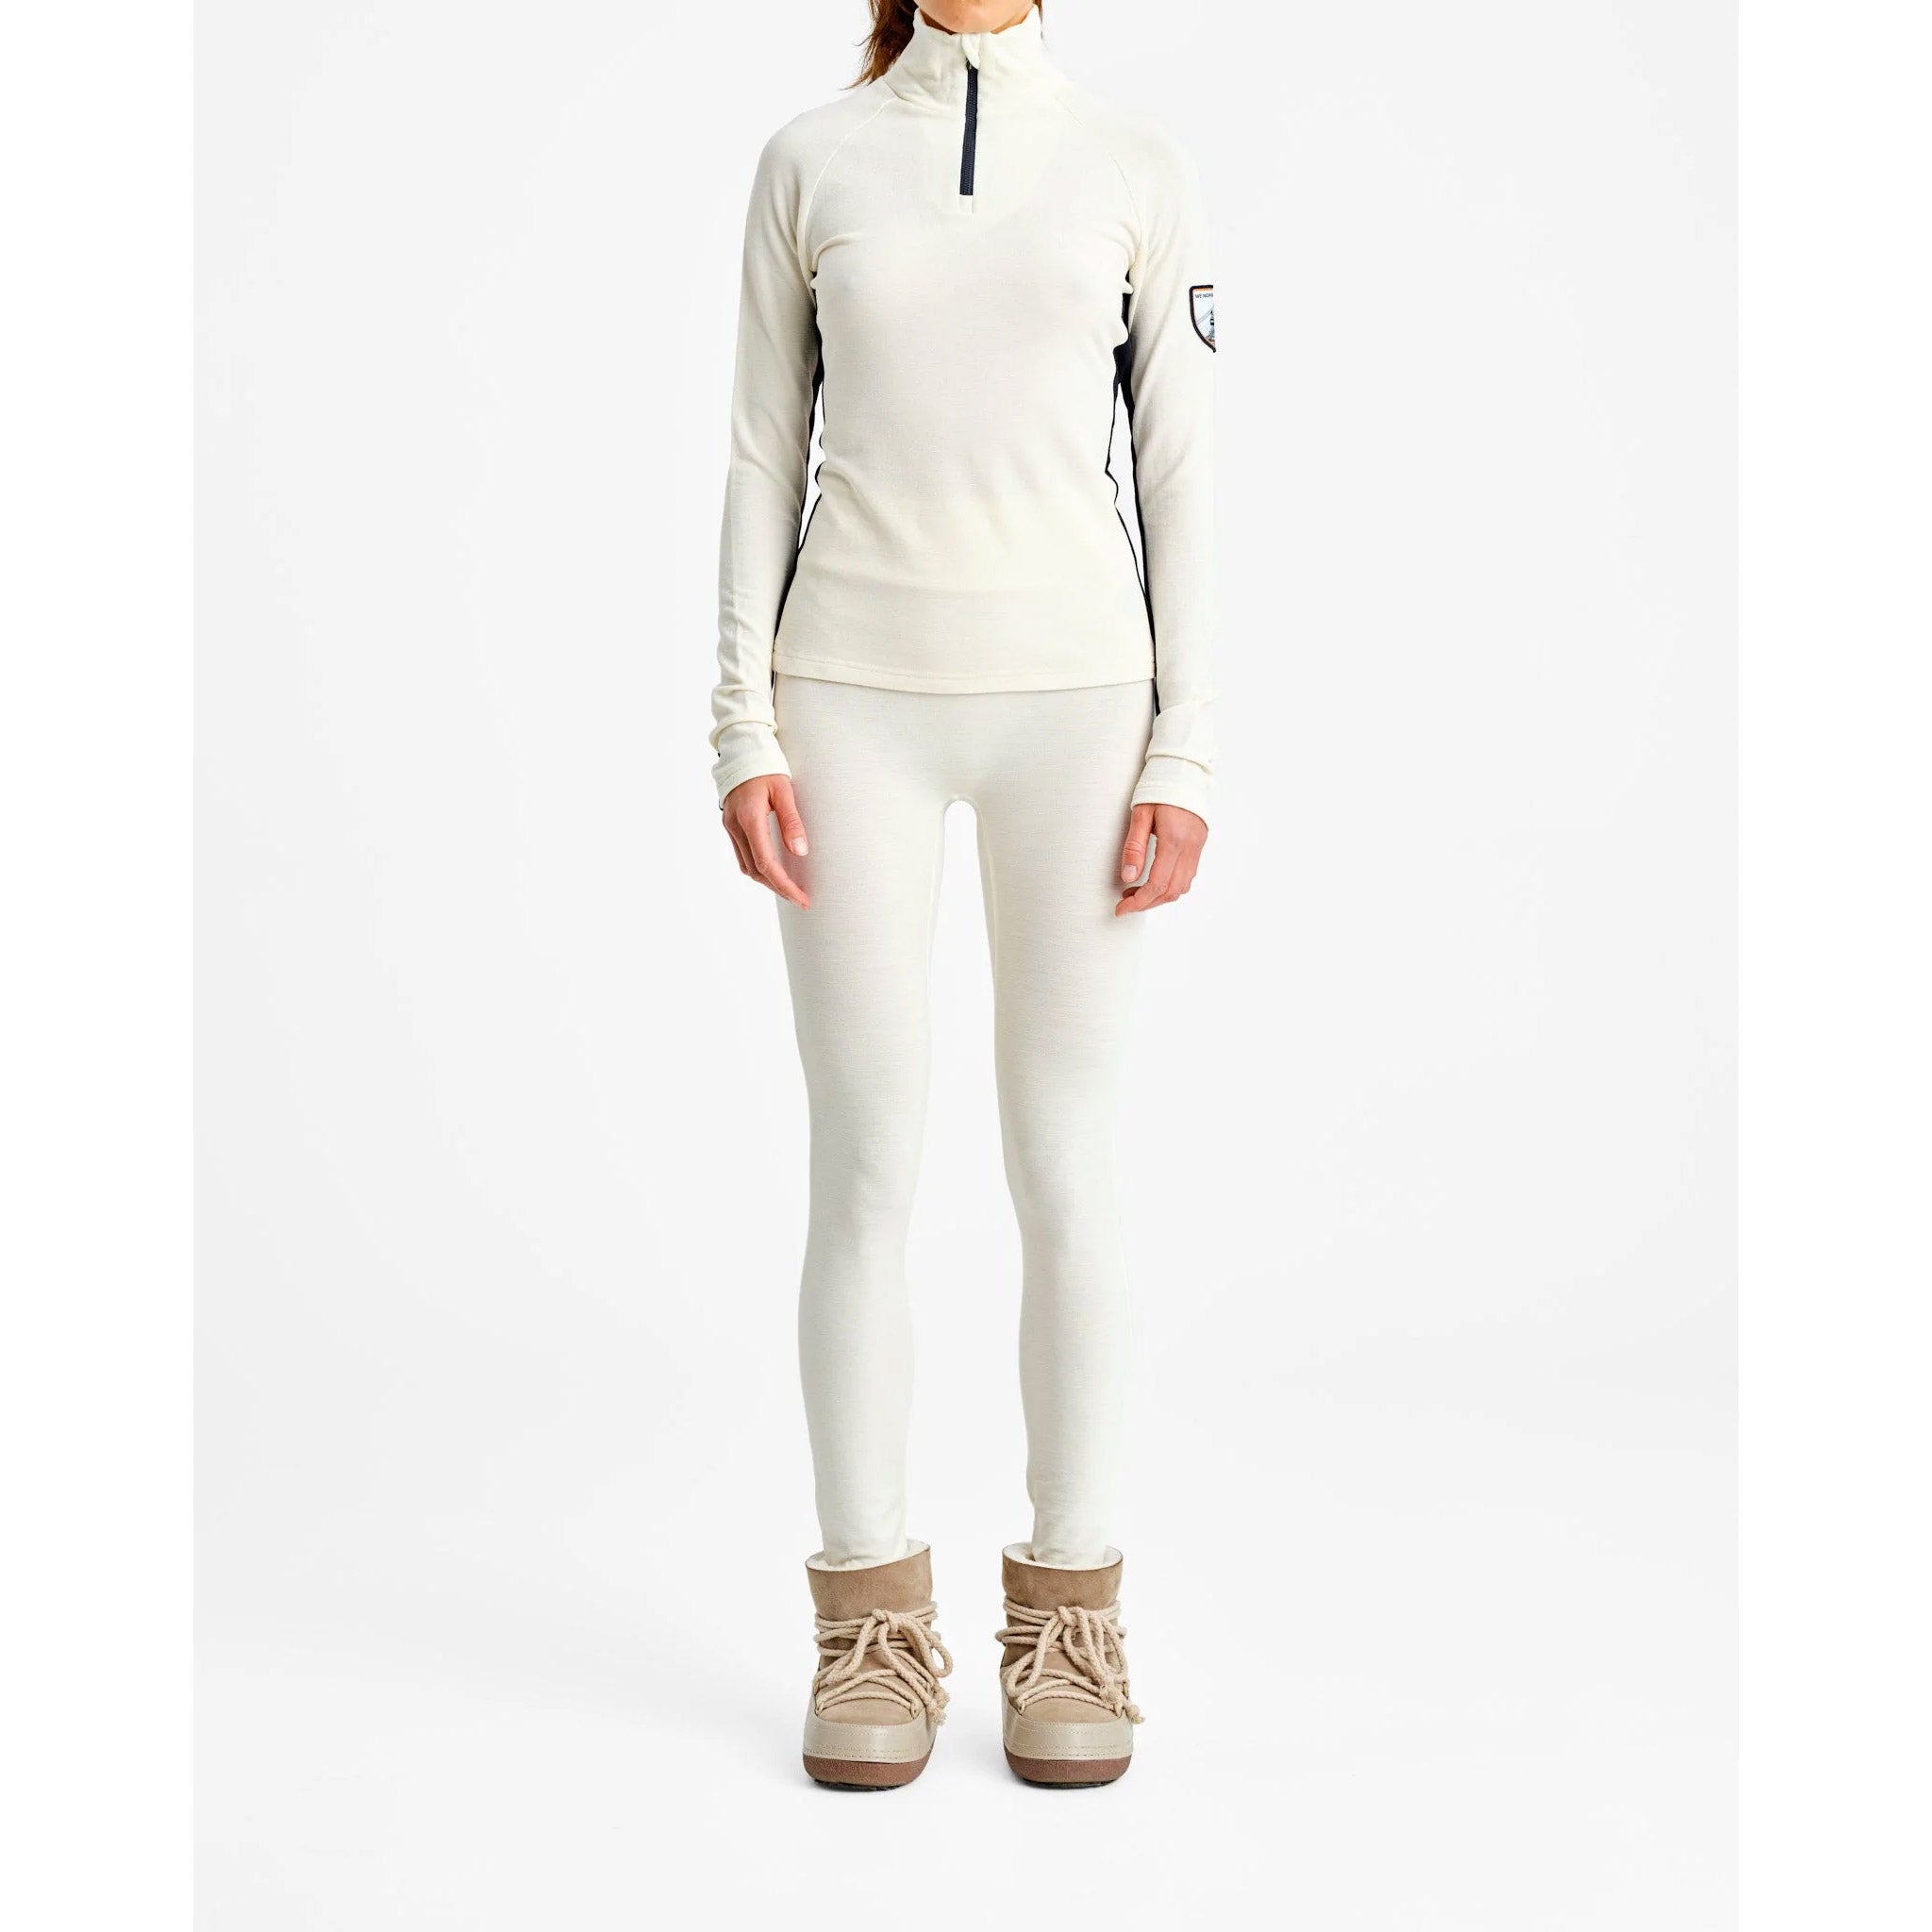 Voss Zipup Sweater in White